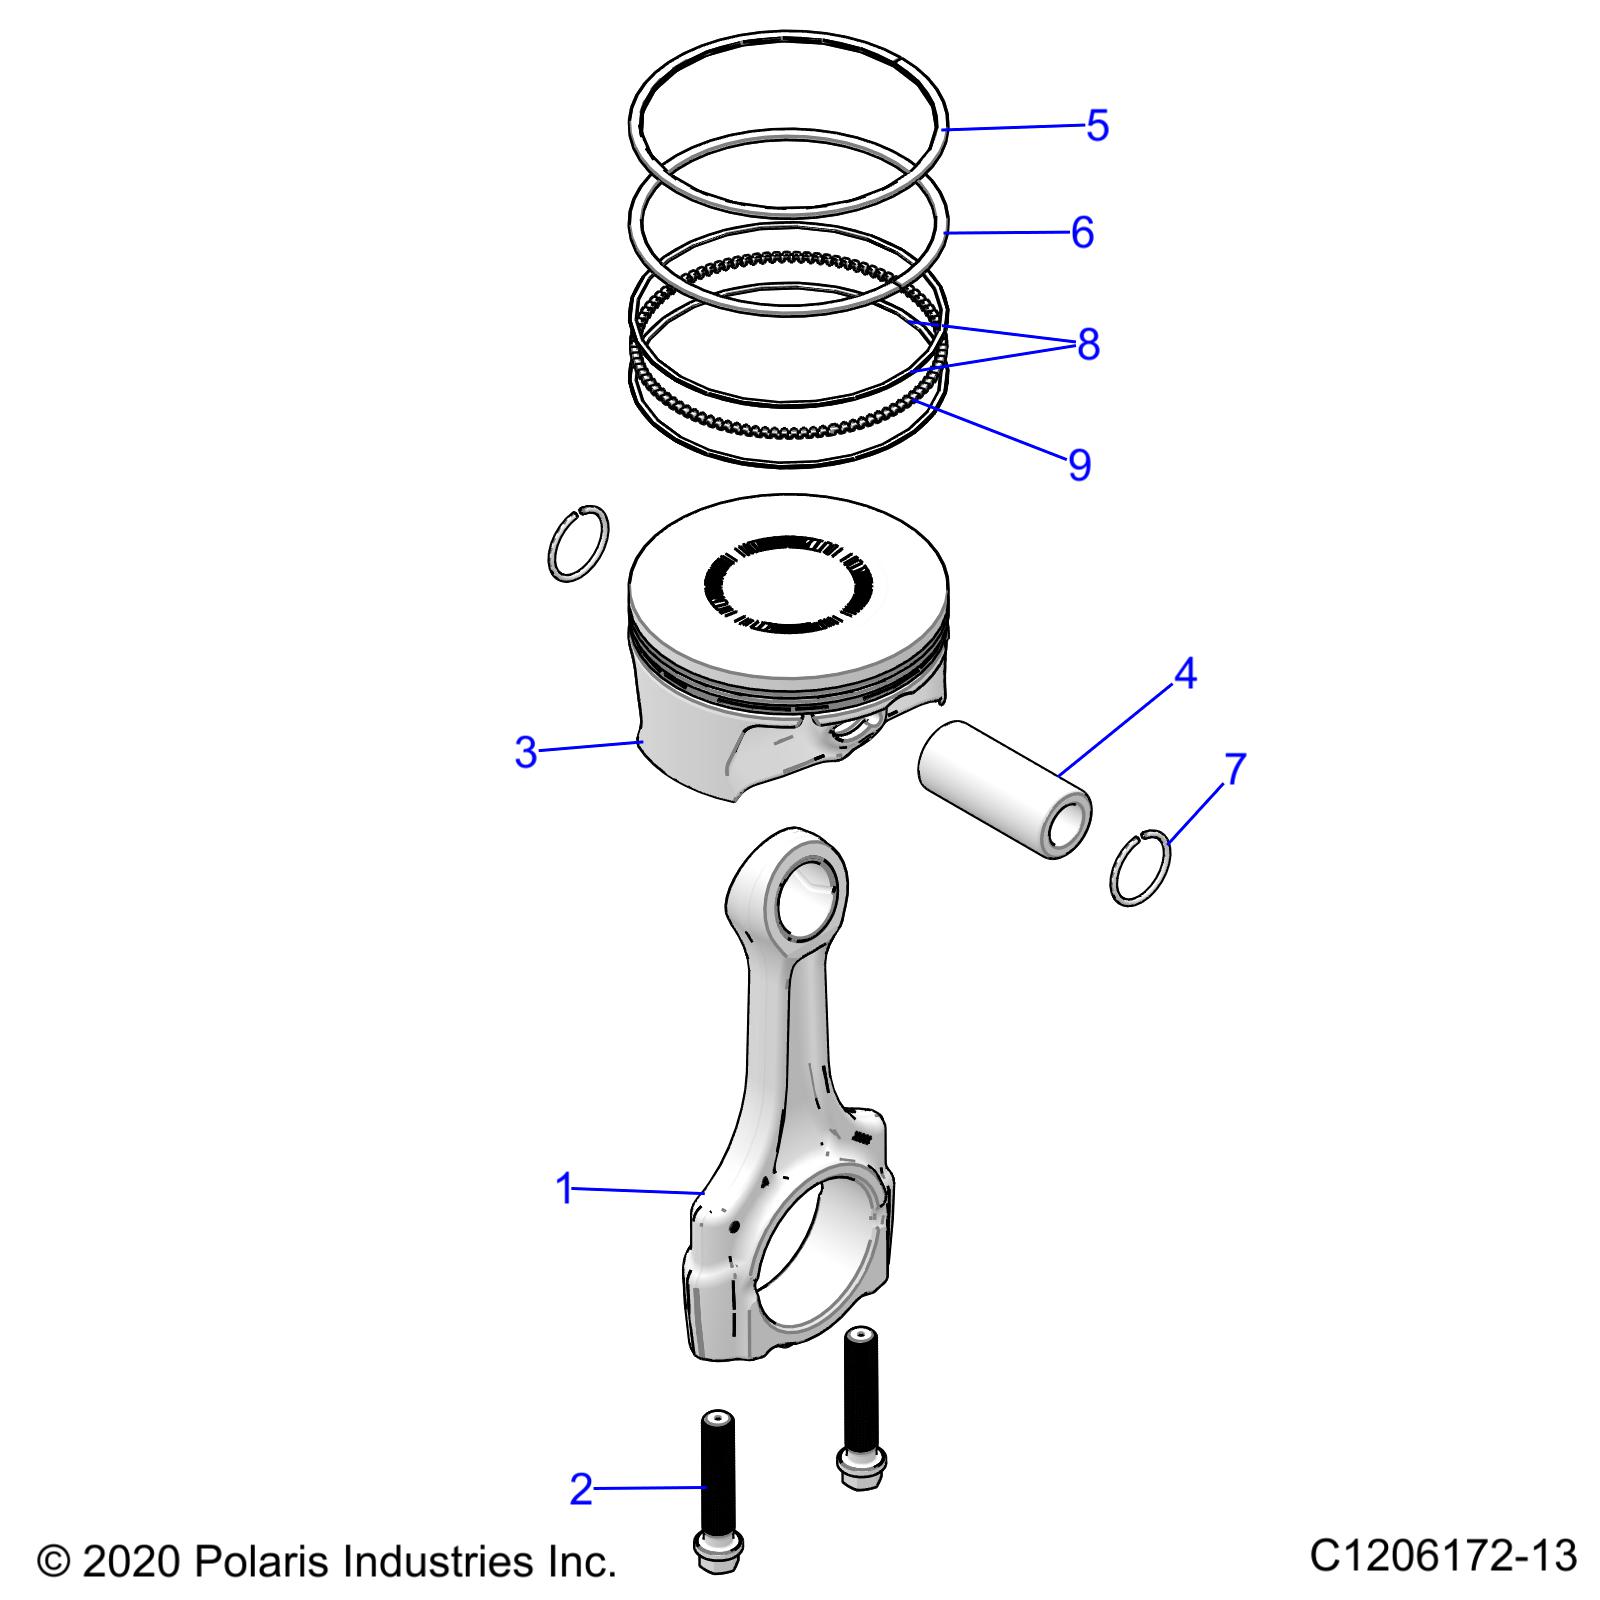 Part Number : 7520356 CONNECTING ROD BOLT 9MM X 1.0M